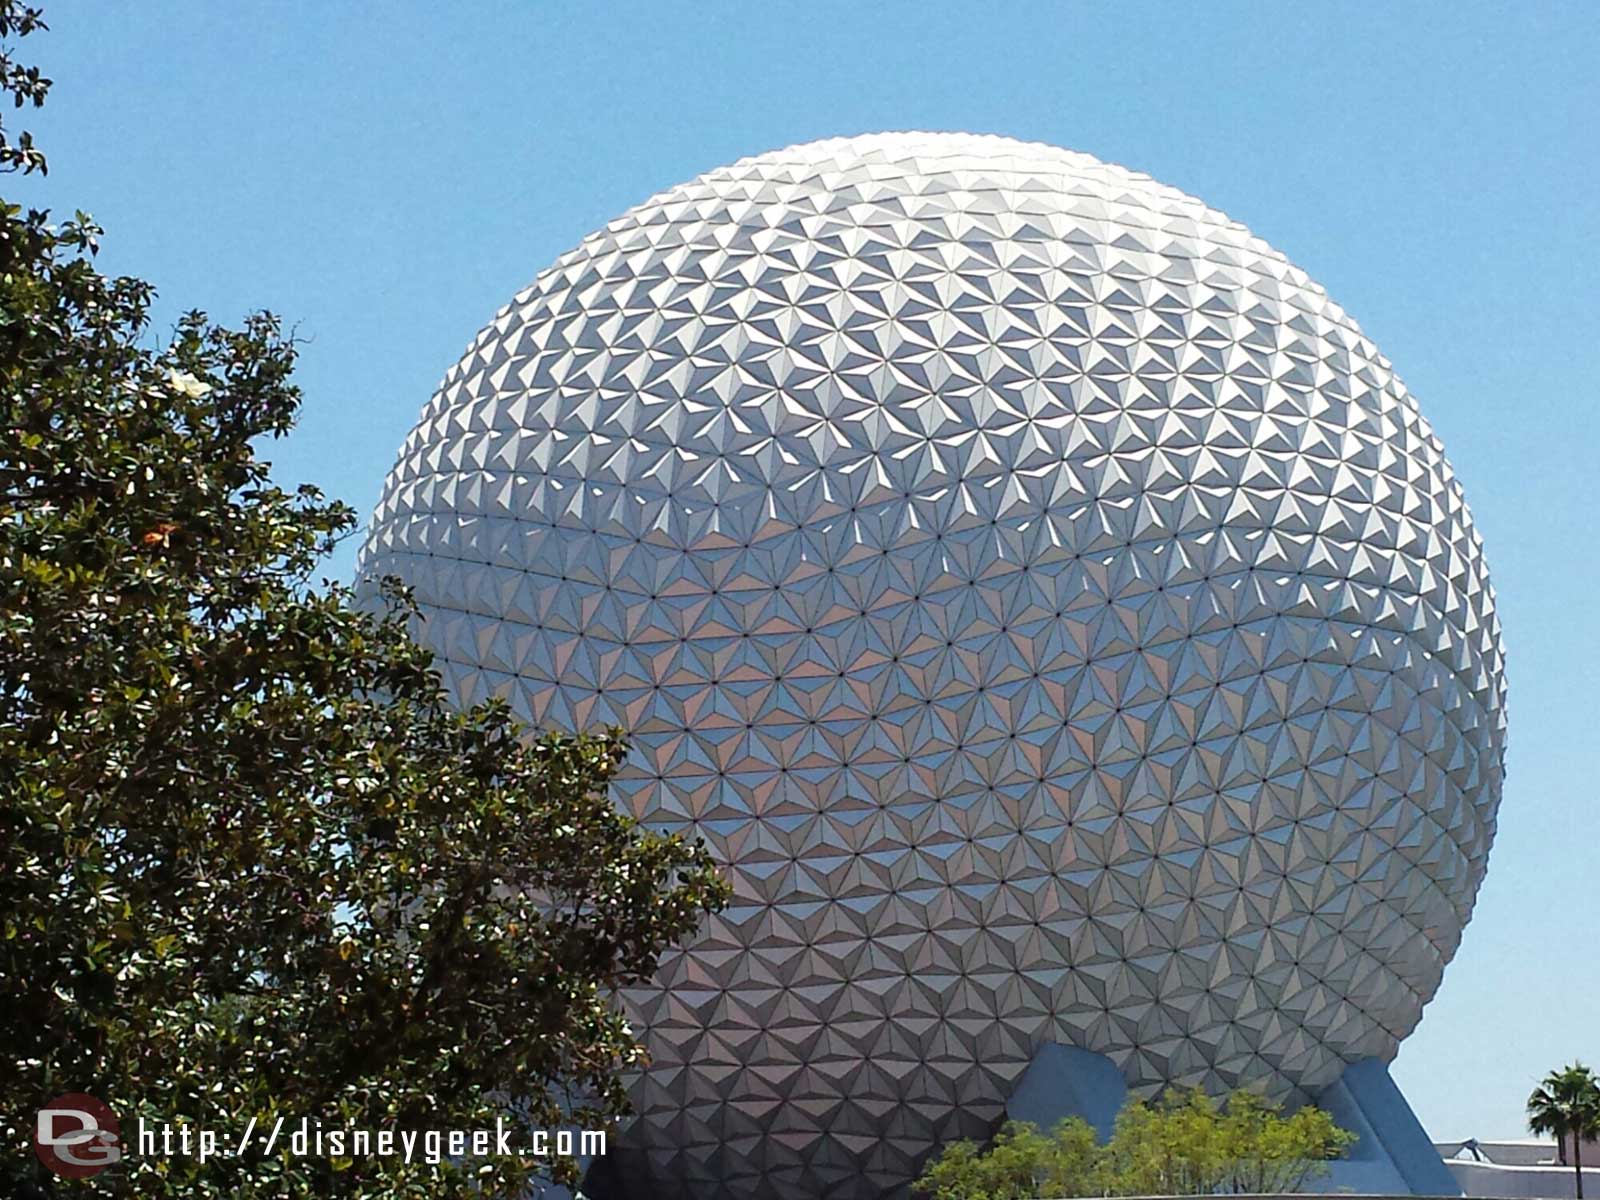 One last look at Spaceship Earth before heading for Kidani and home